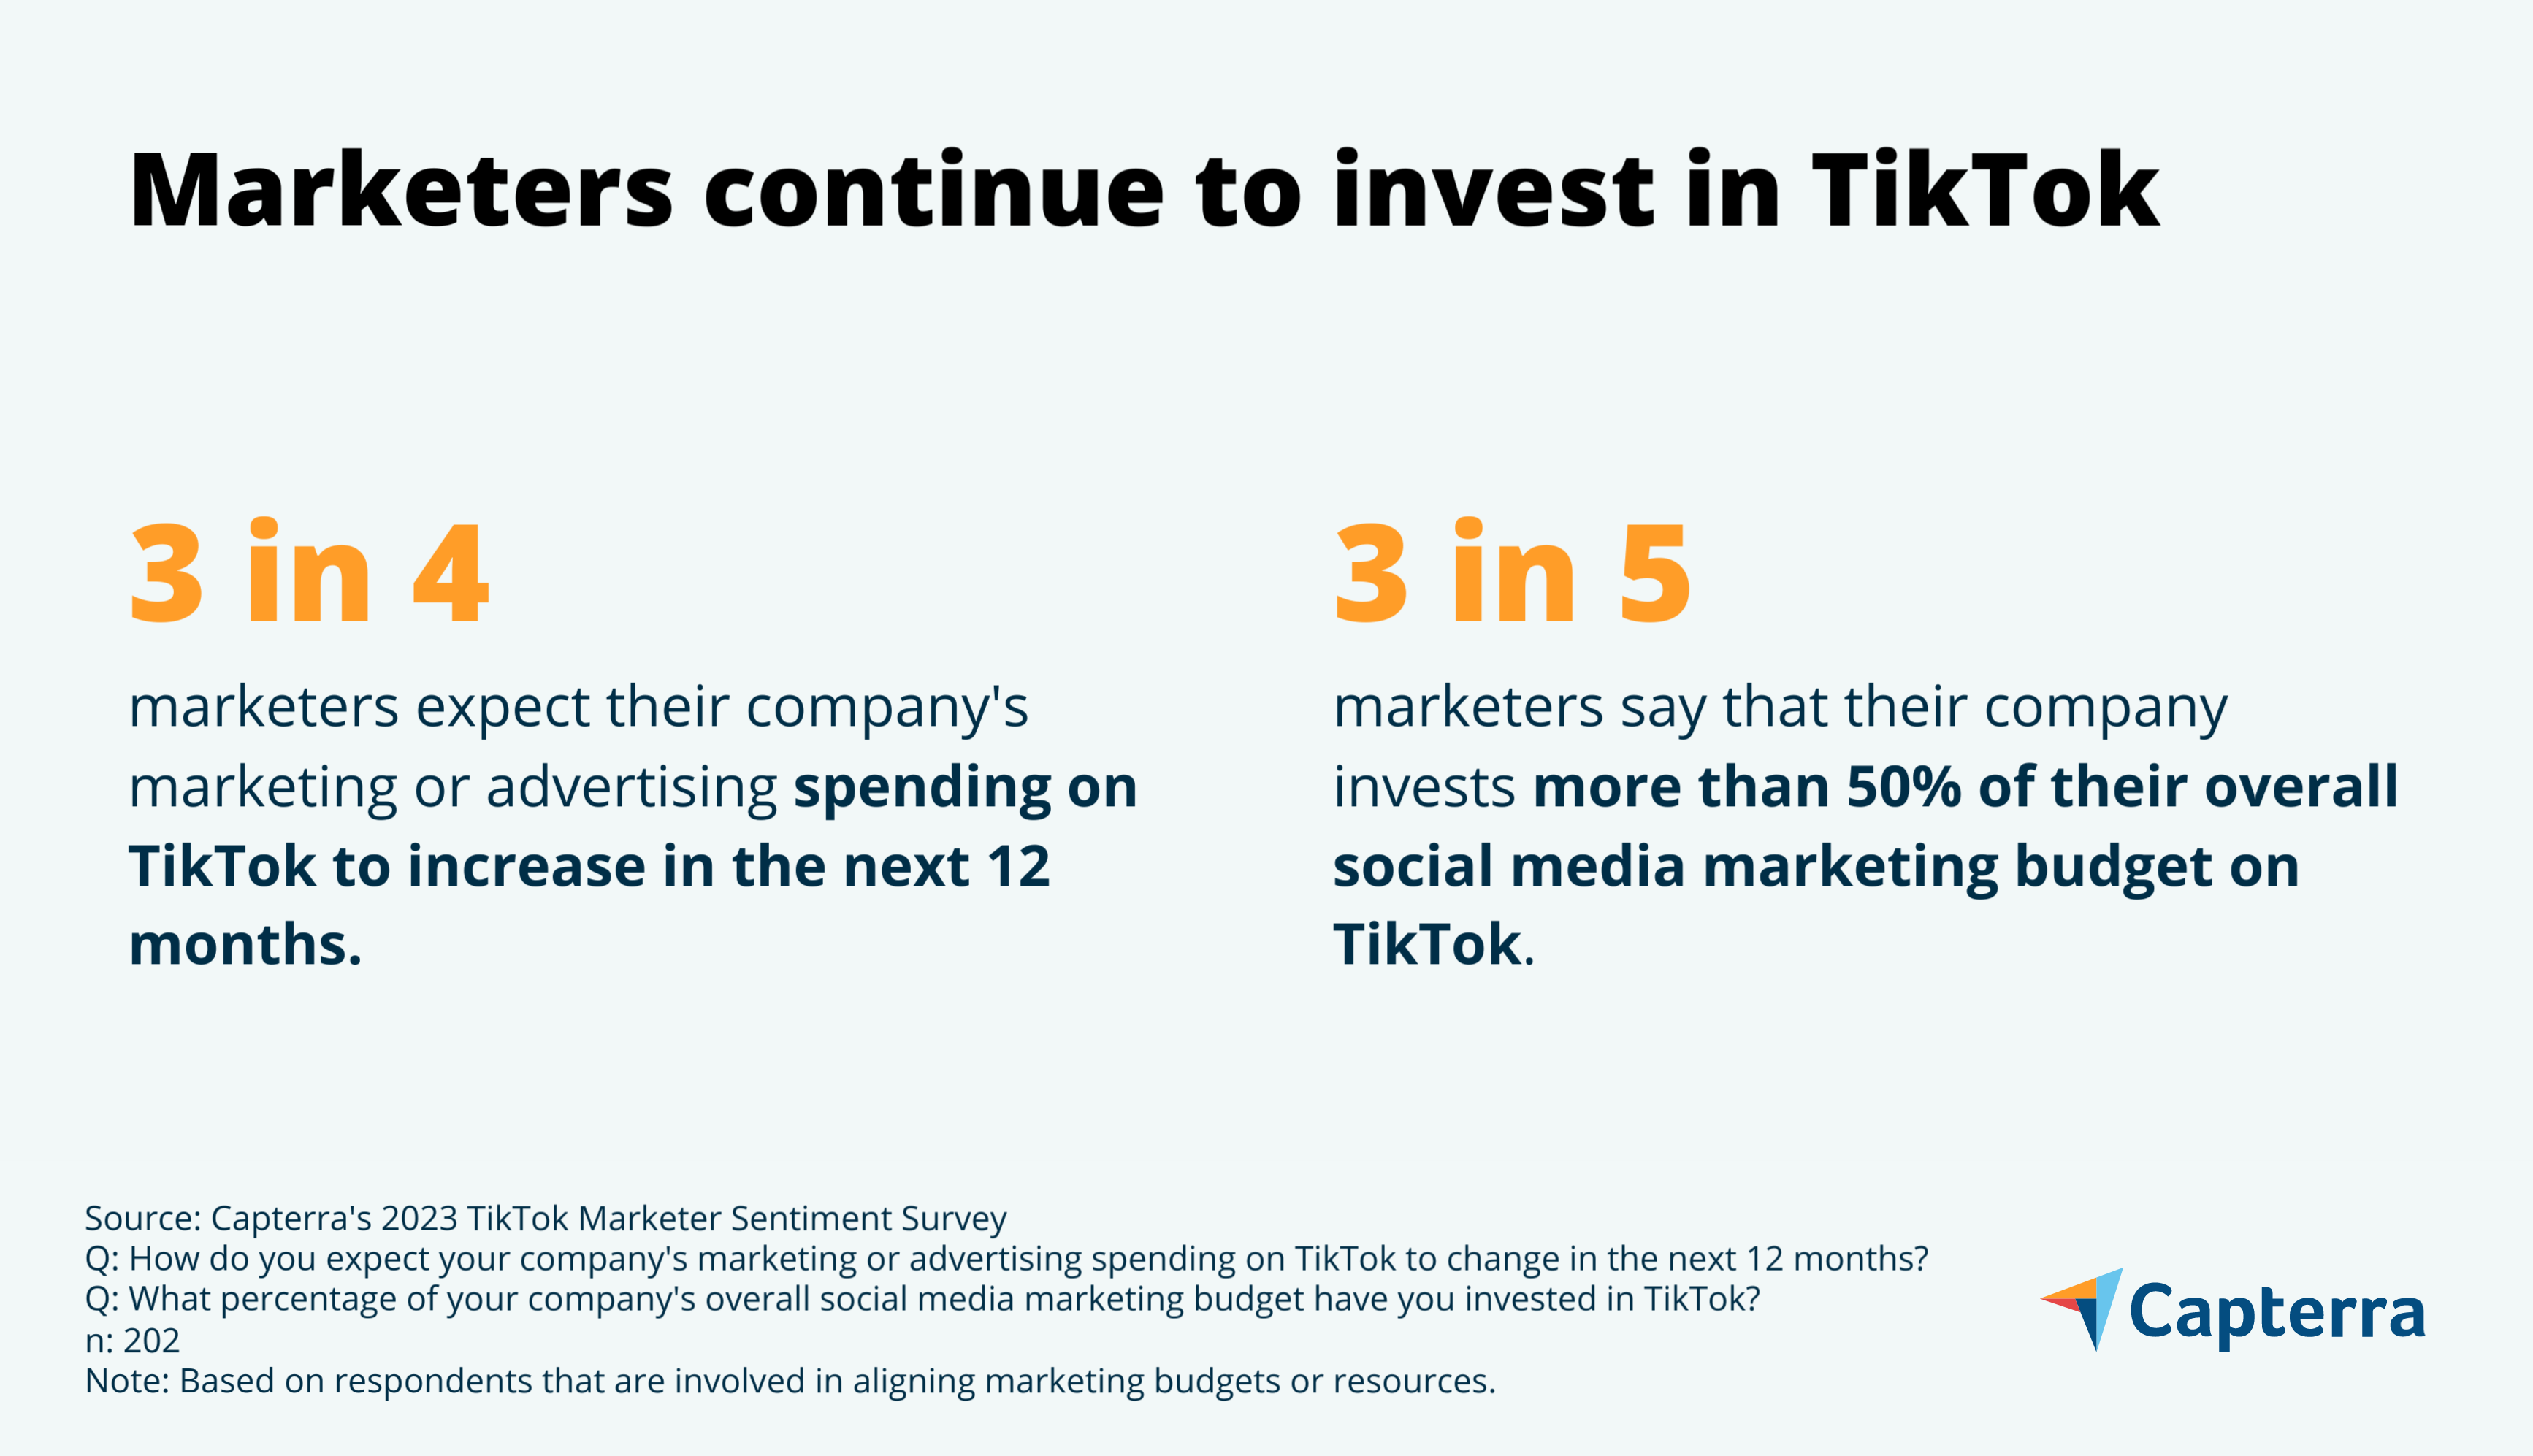 Marketers continue to invest in TikTok